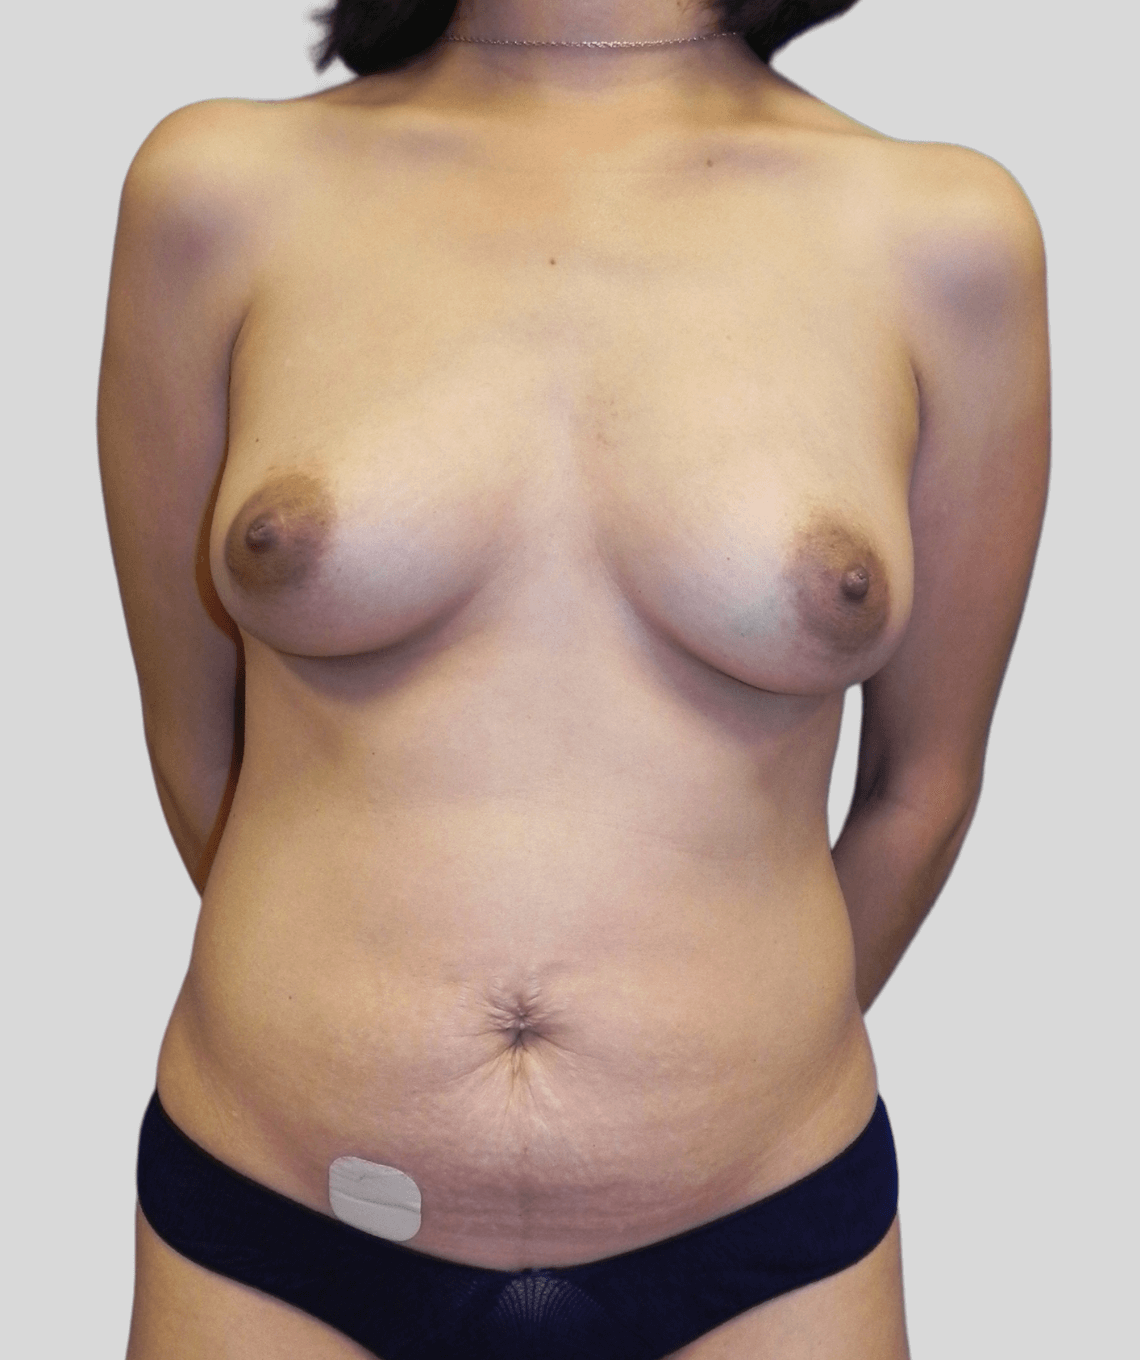 diep flap nipple sparing mastectomy before and after photos - prma plastic surgery - case 5